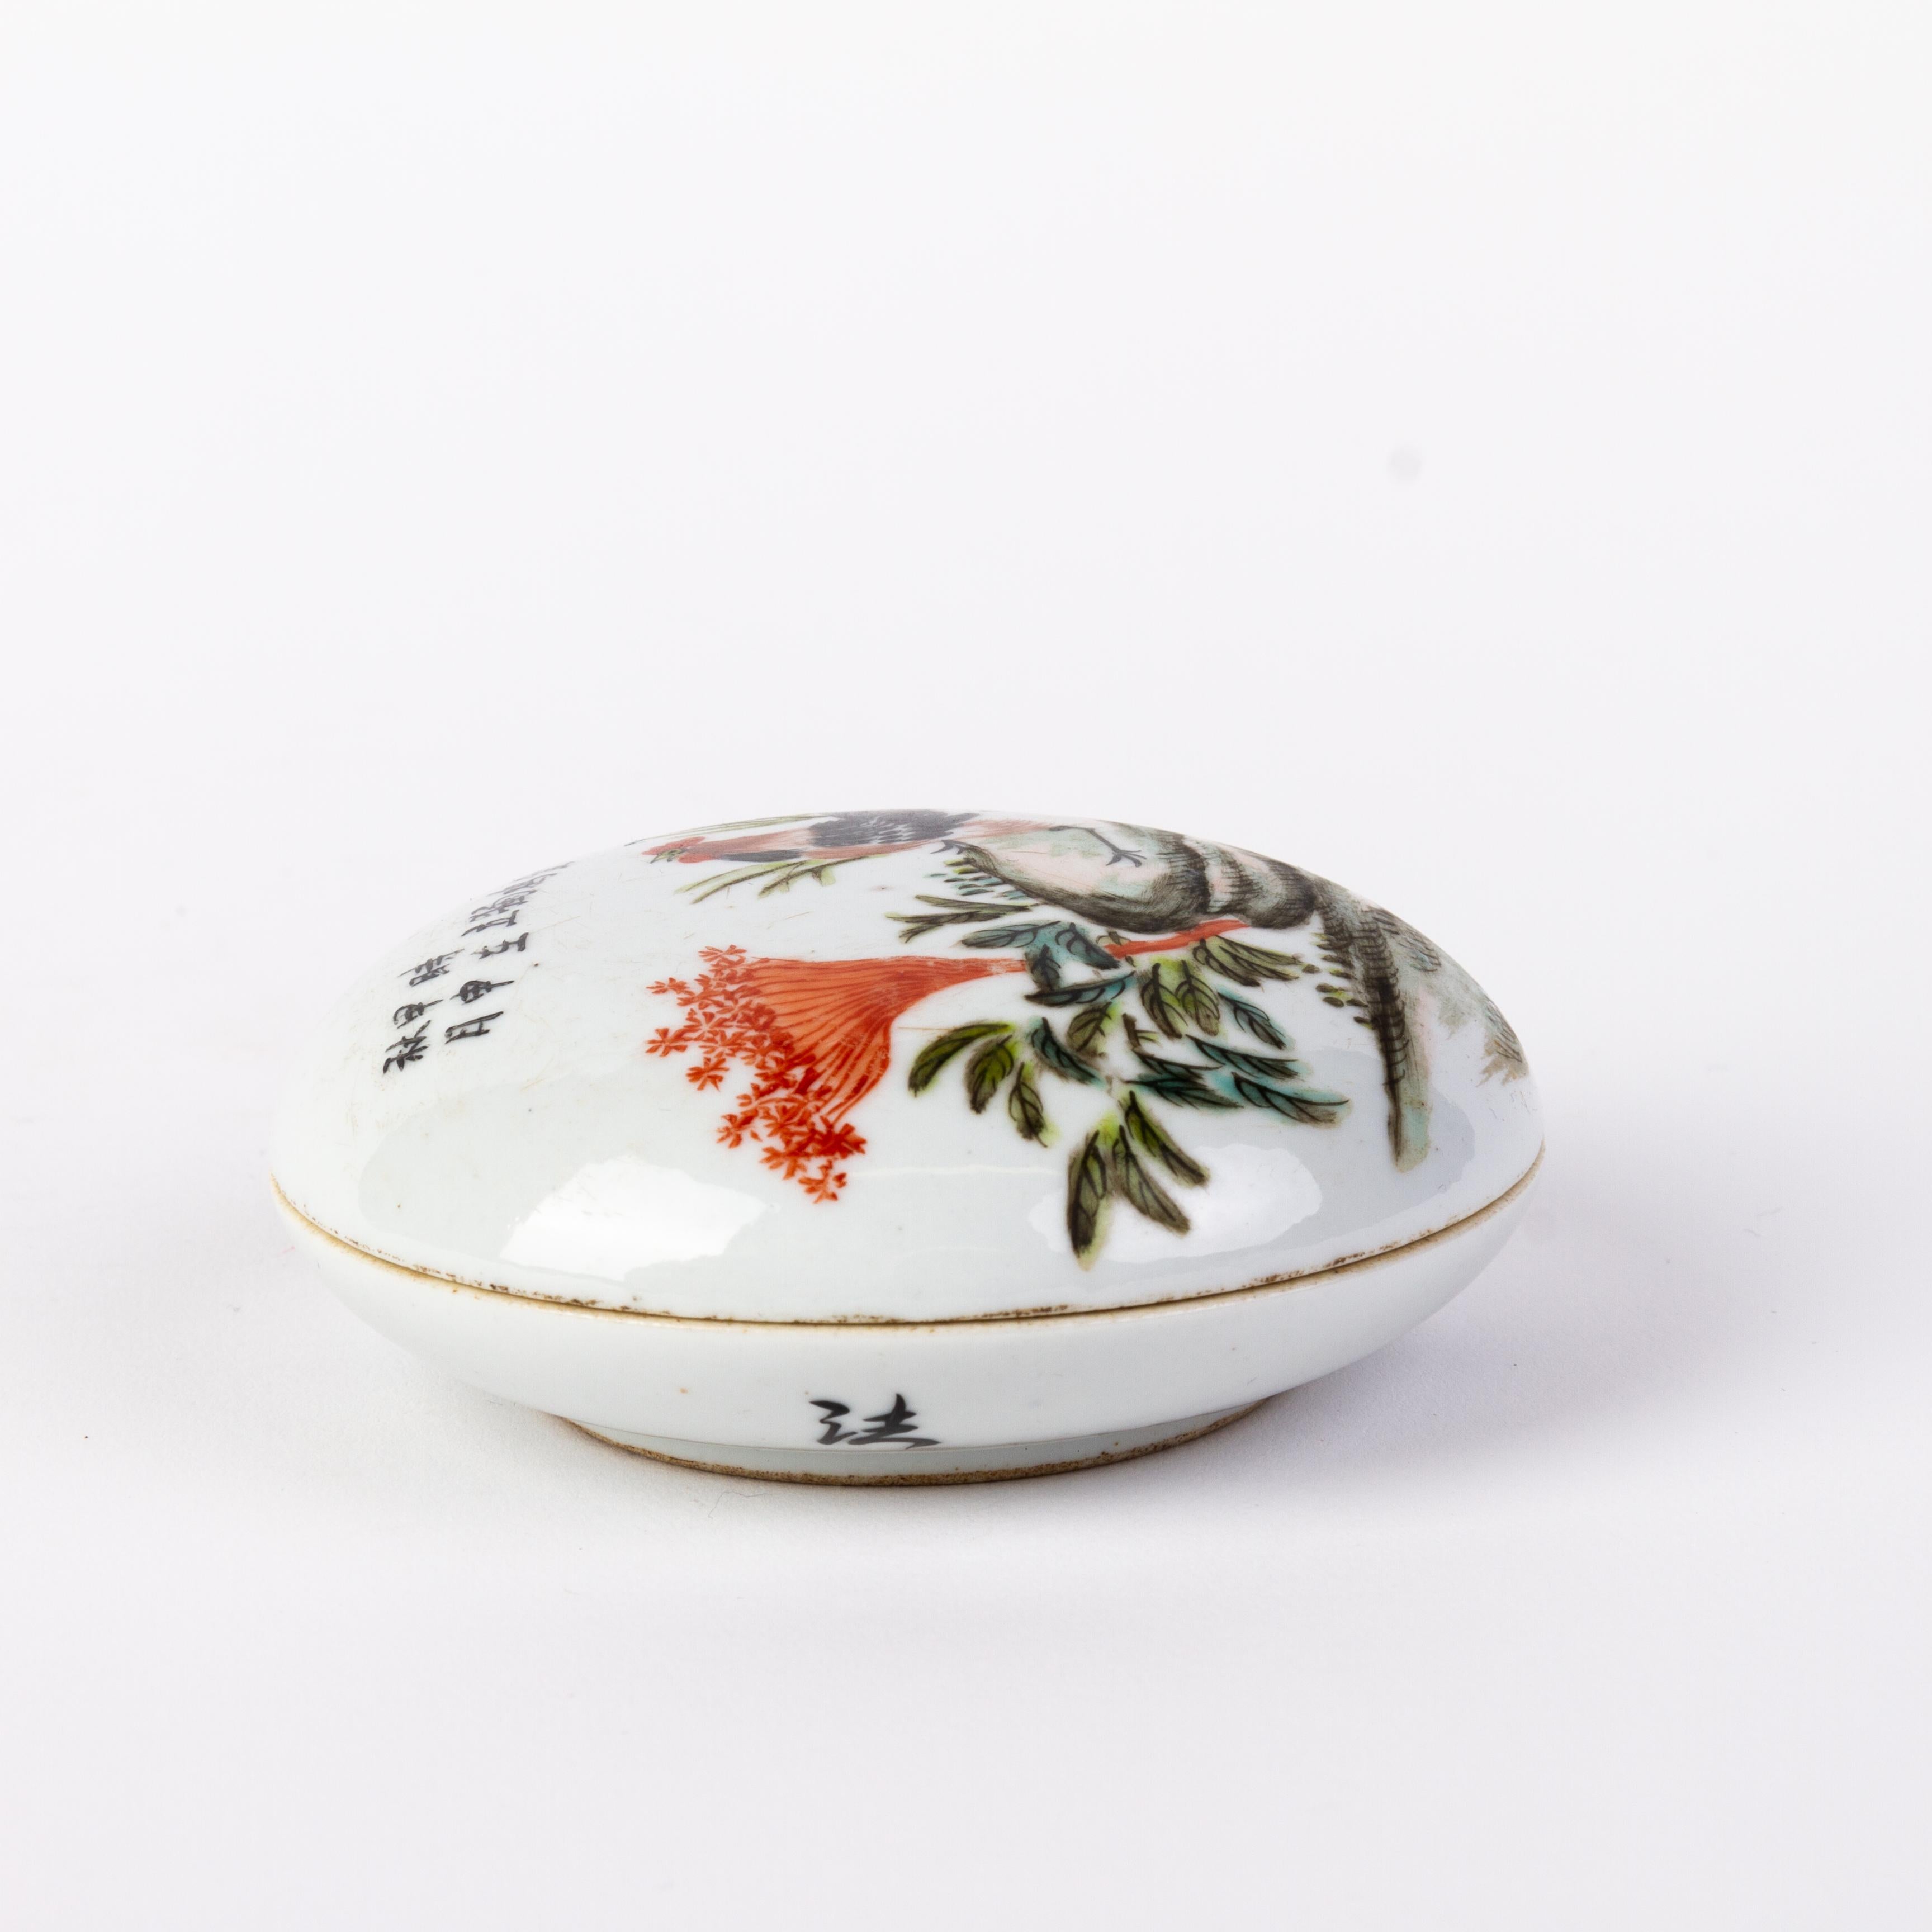 Chinese Republic Period Porcelain Lidded Box 
Good condition 
From a private collection.
Free international shipping.